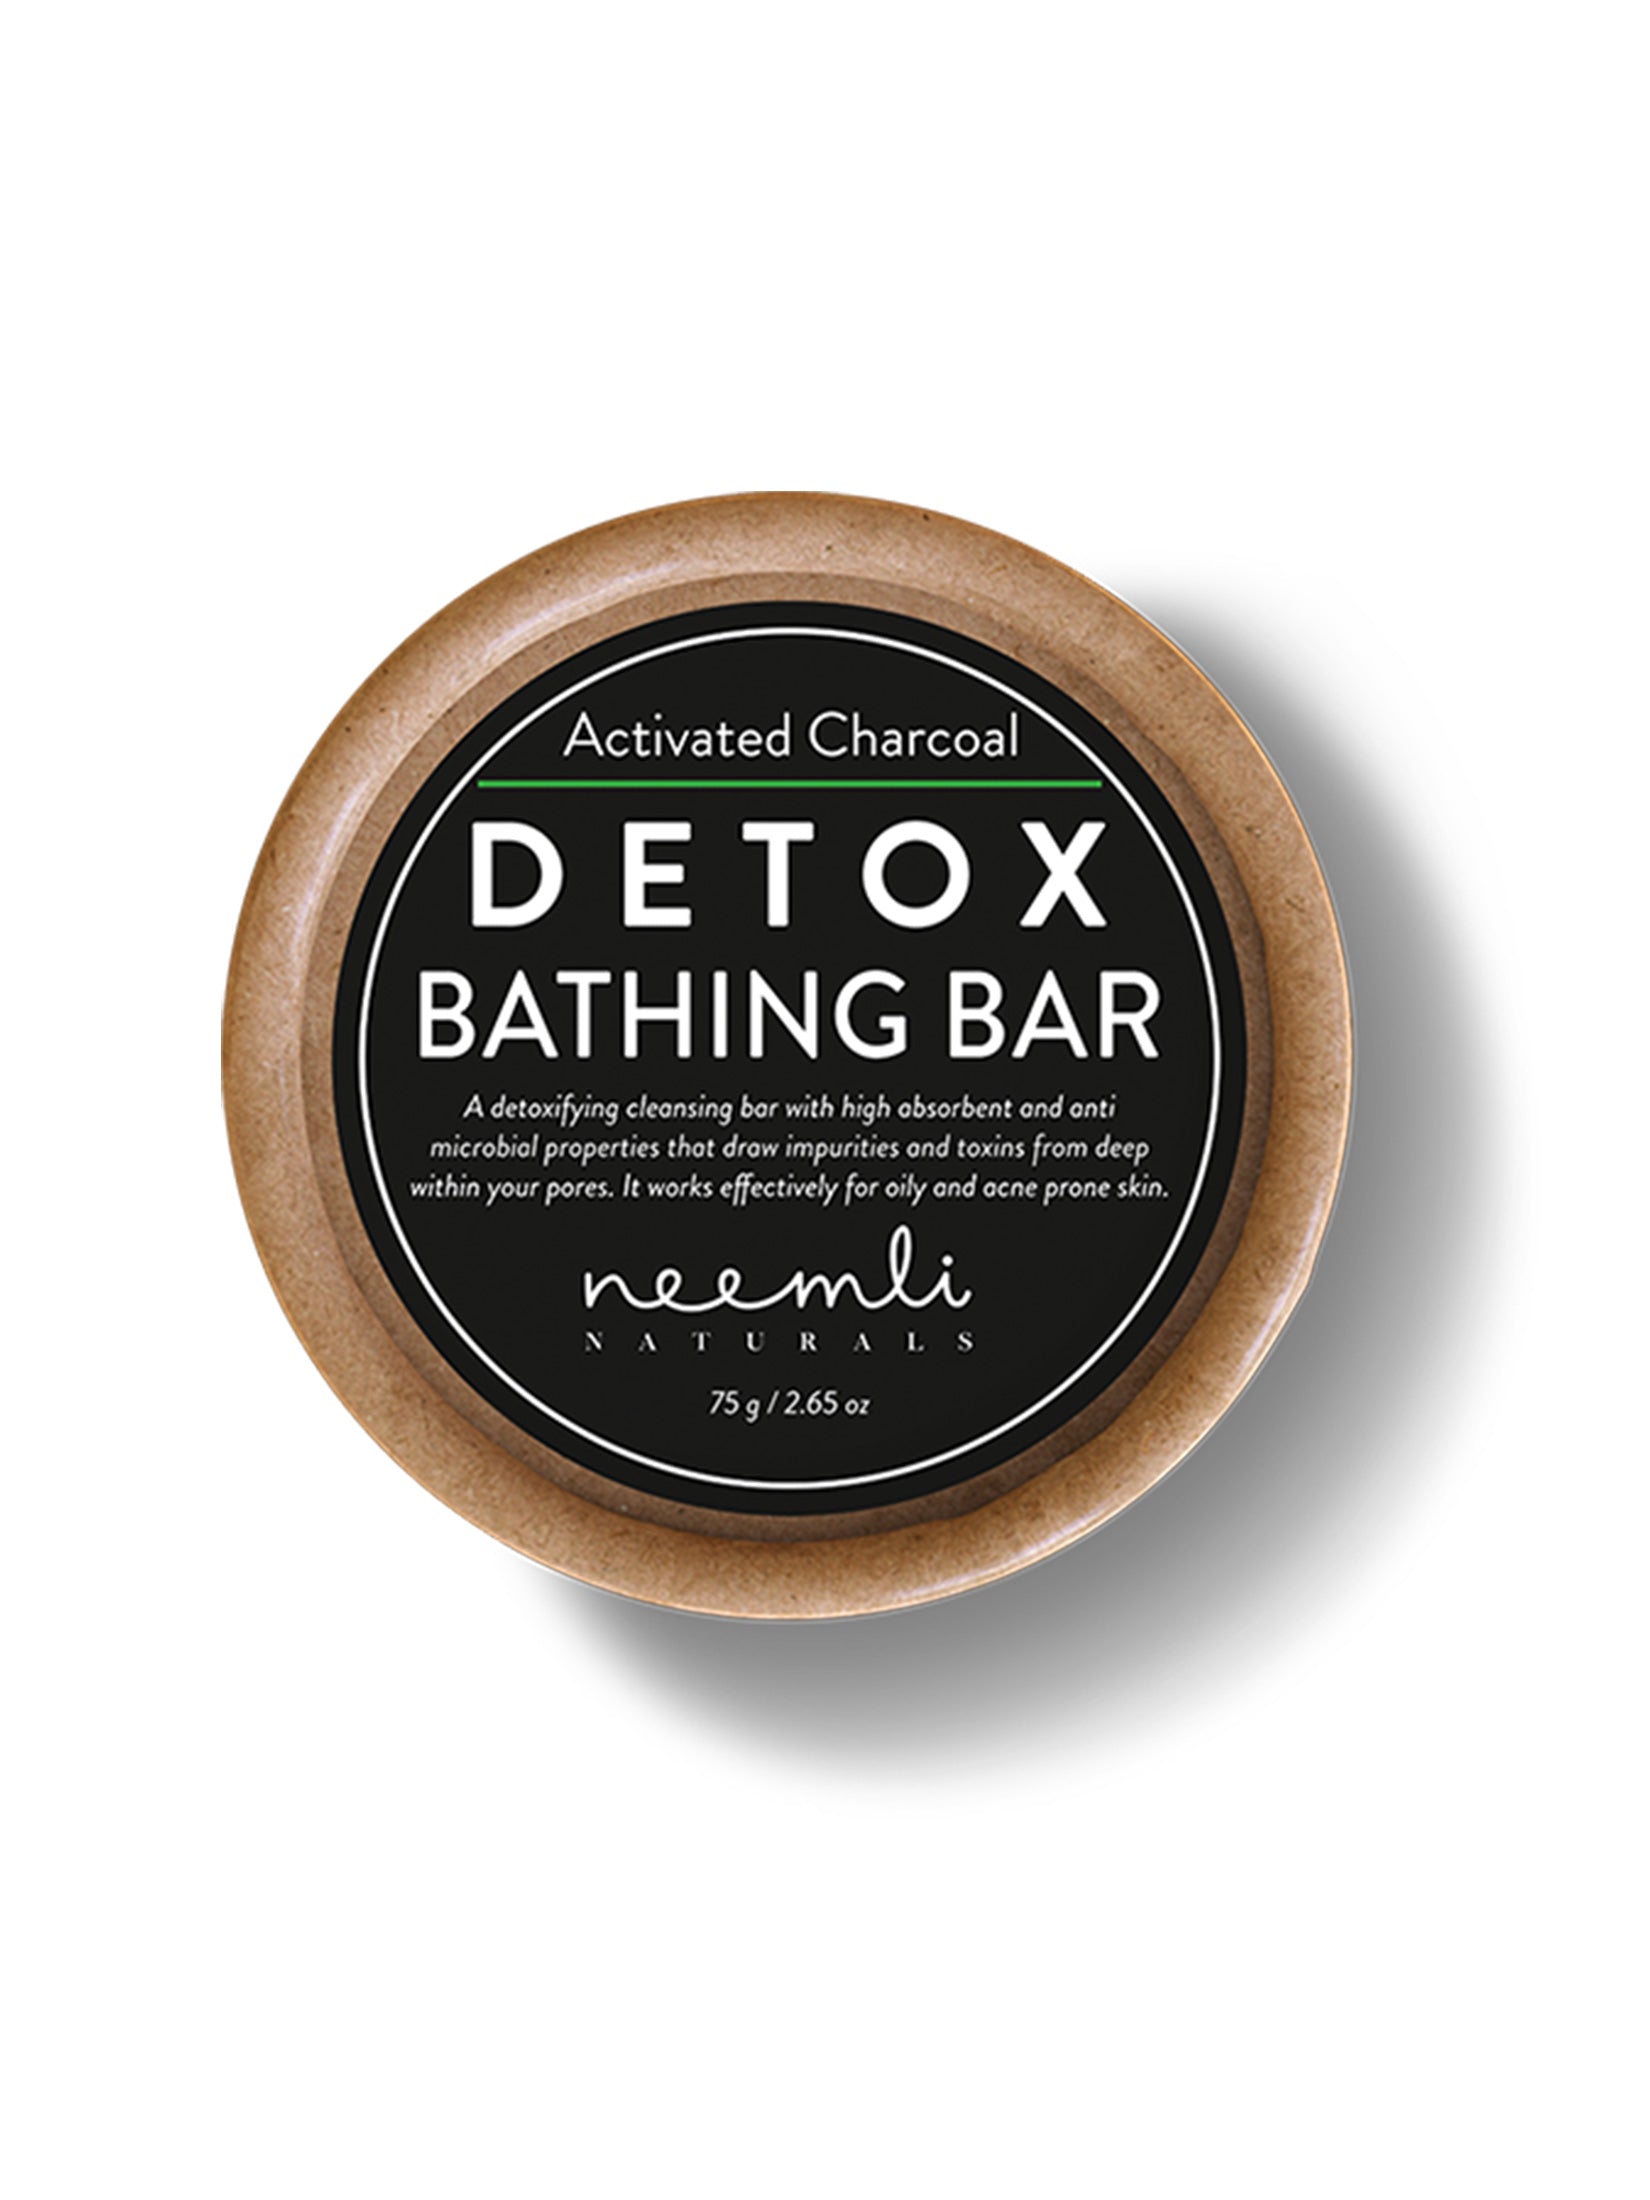 Activated Charcoal Detox Bathing Bar